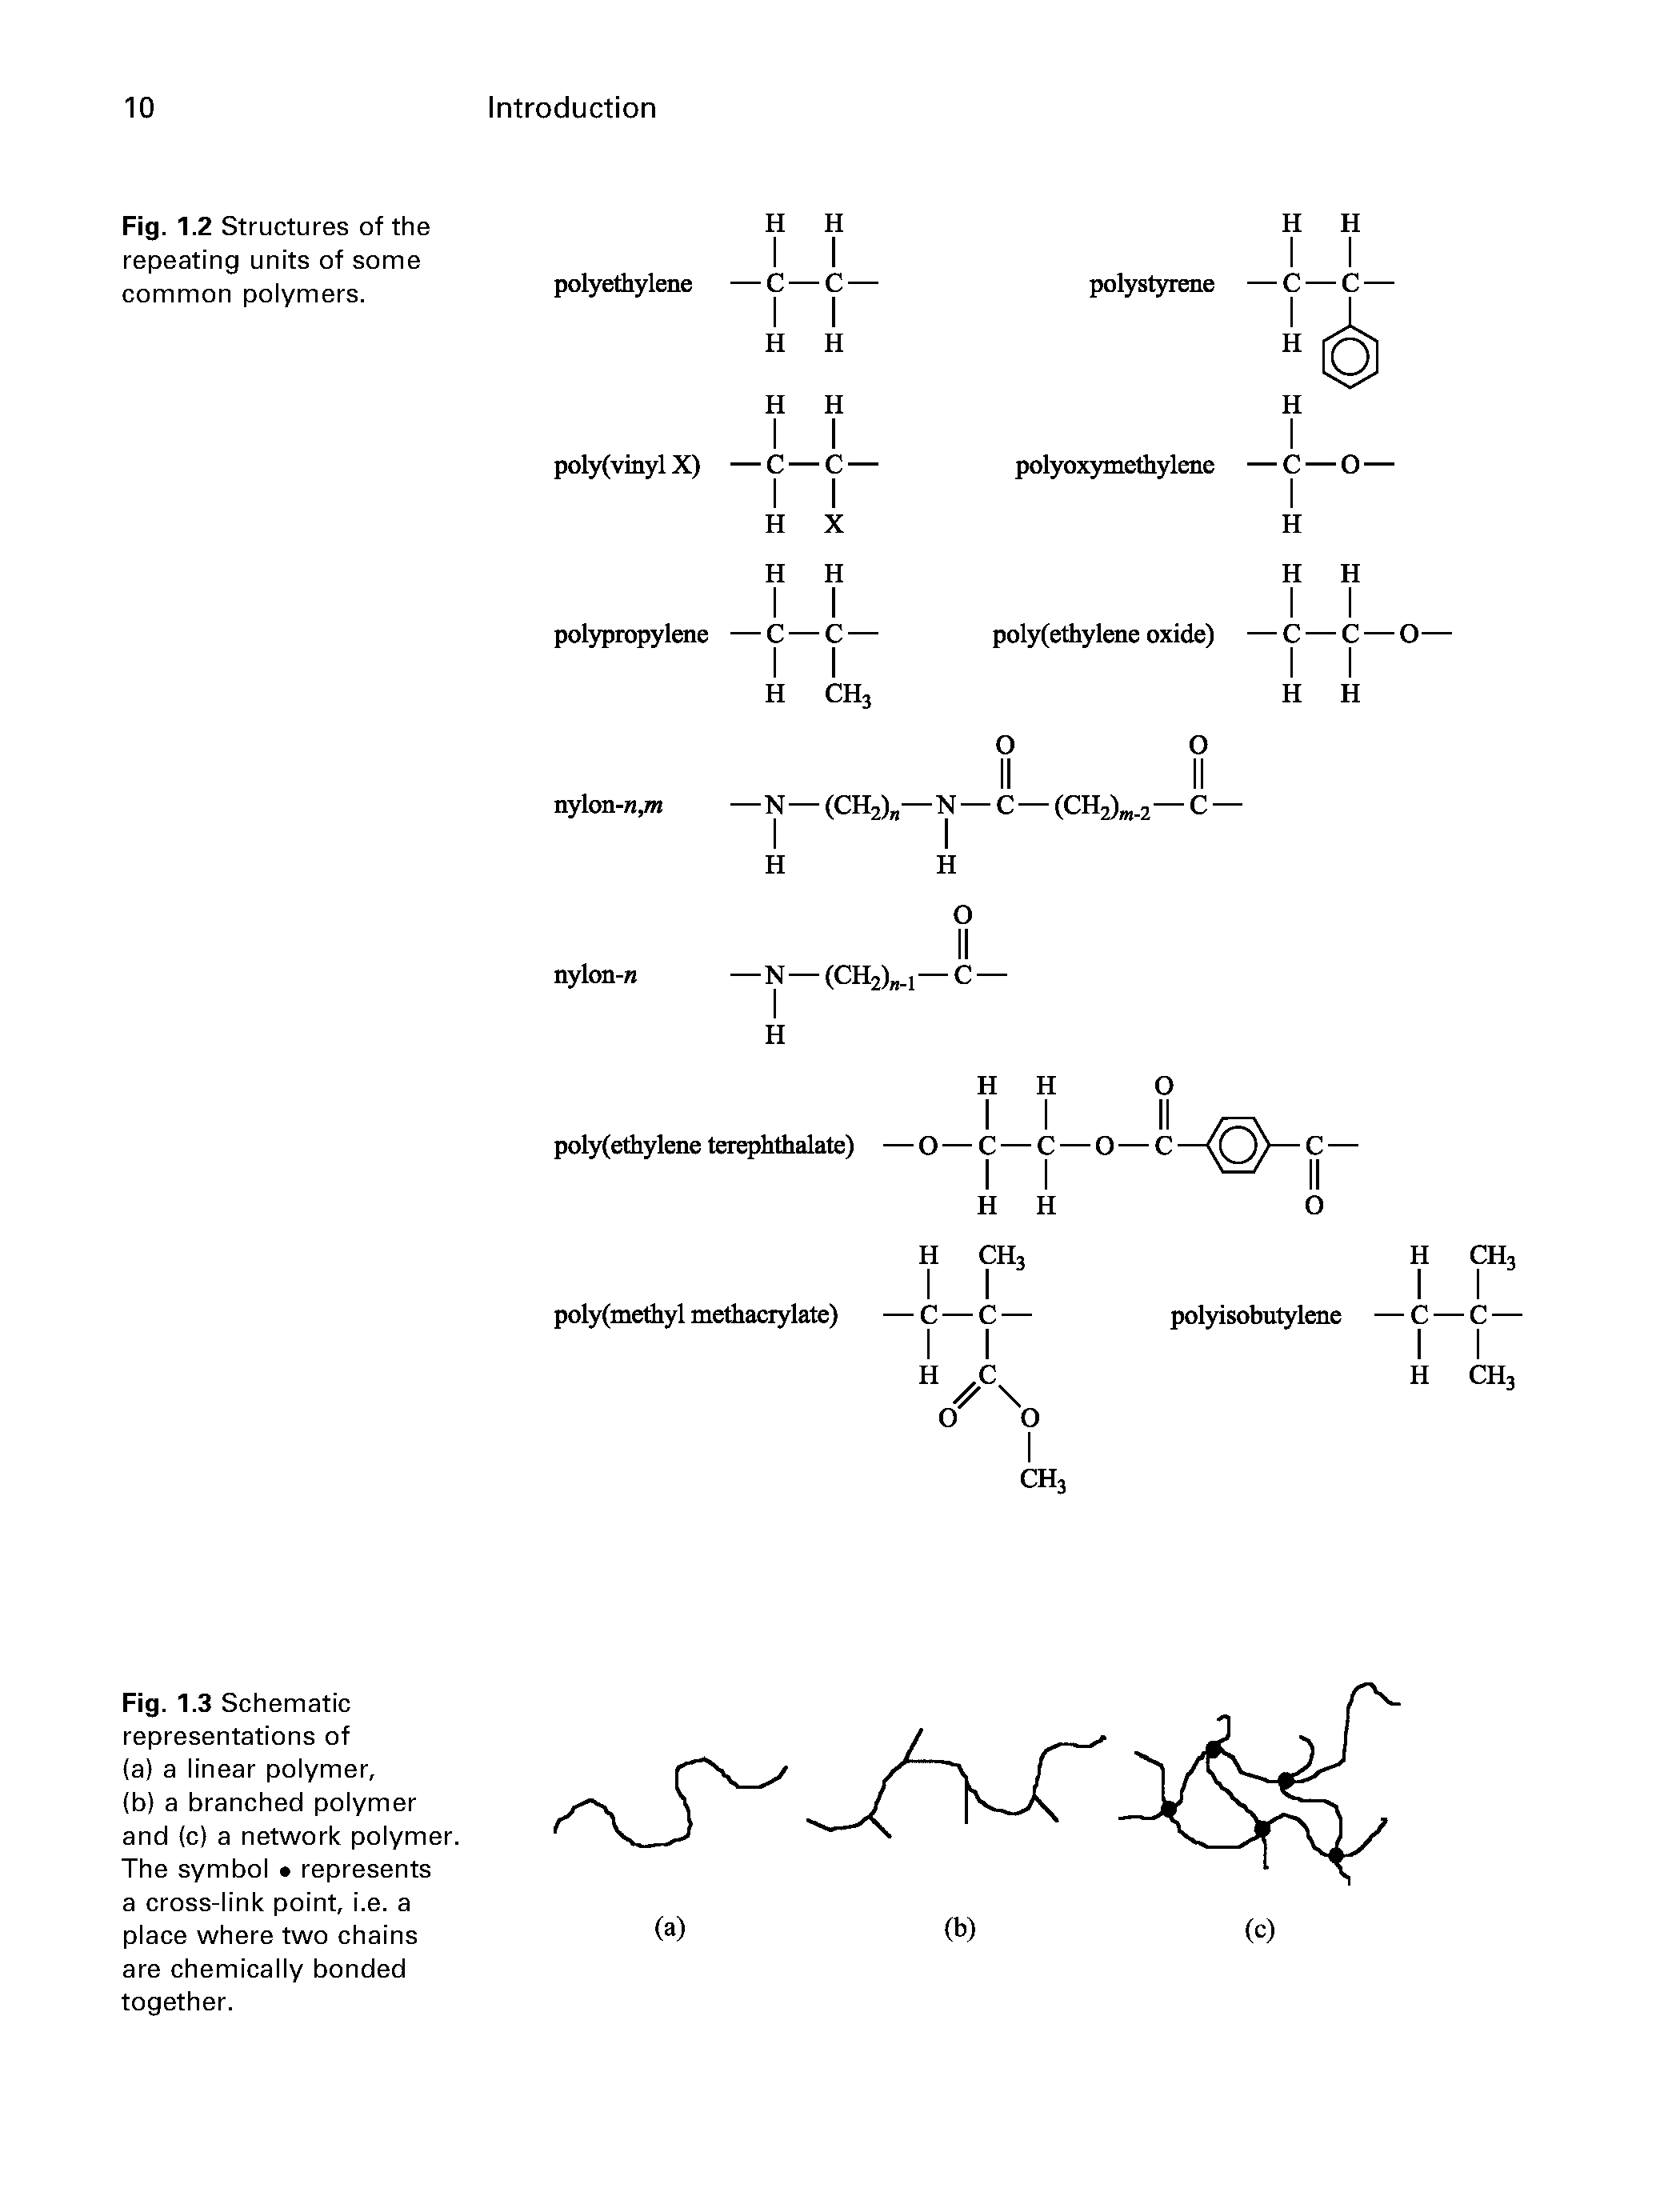 Fig. 1.2 Structures of the repeating units of some common polymers.